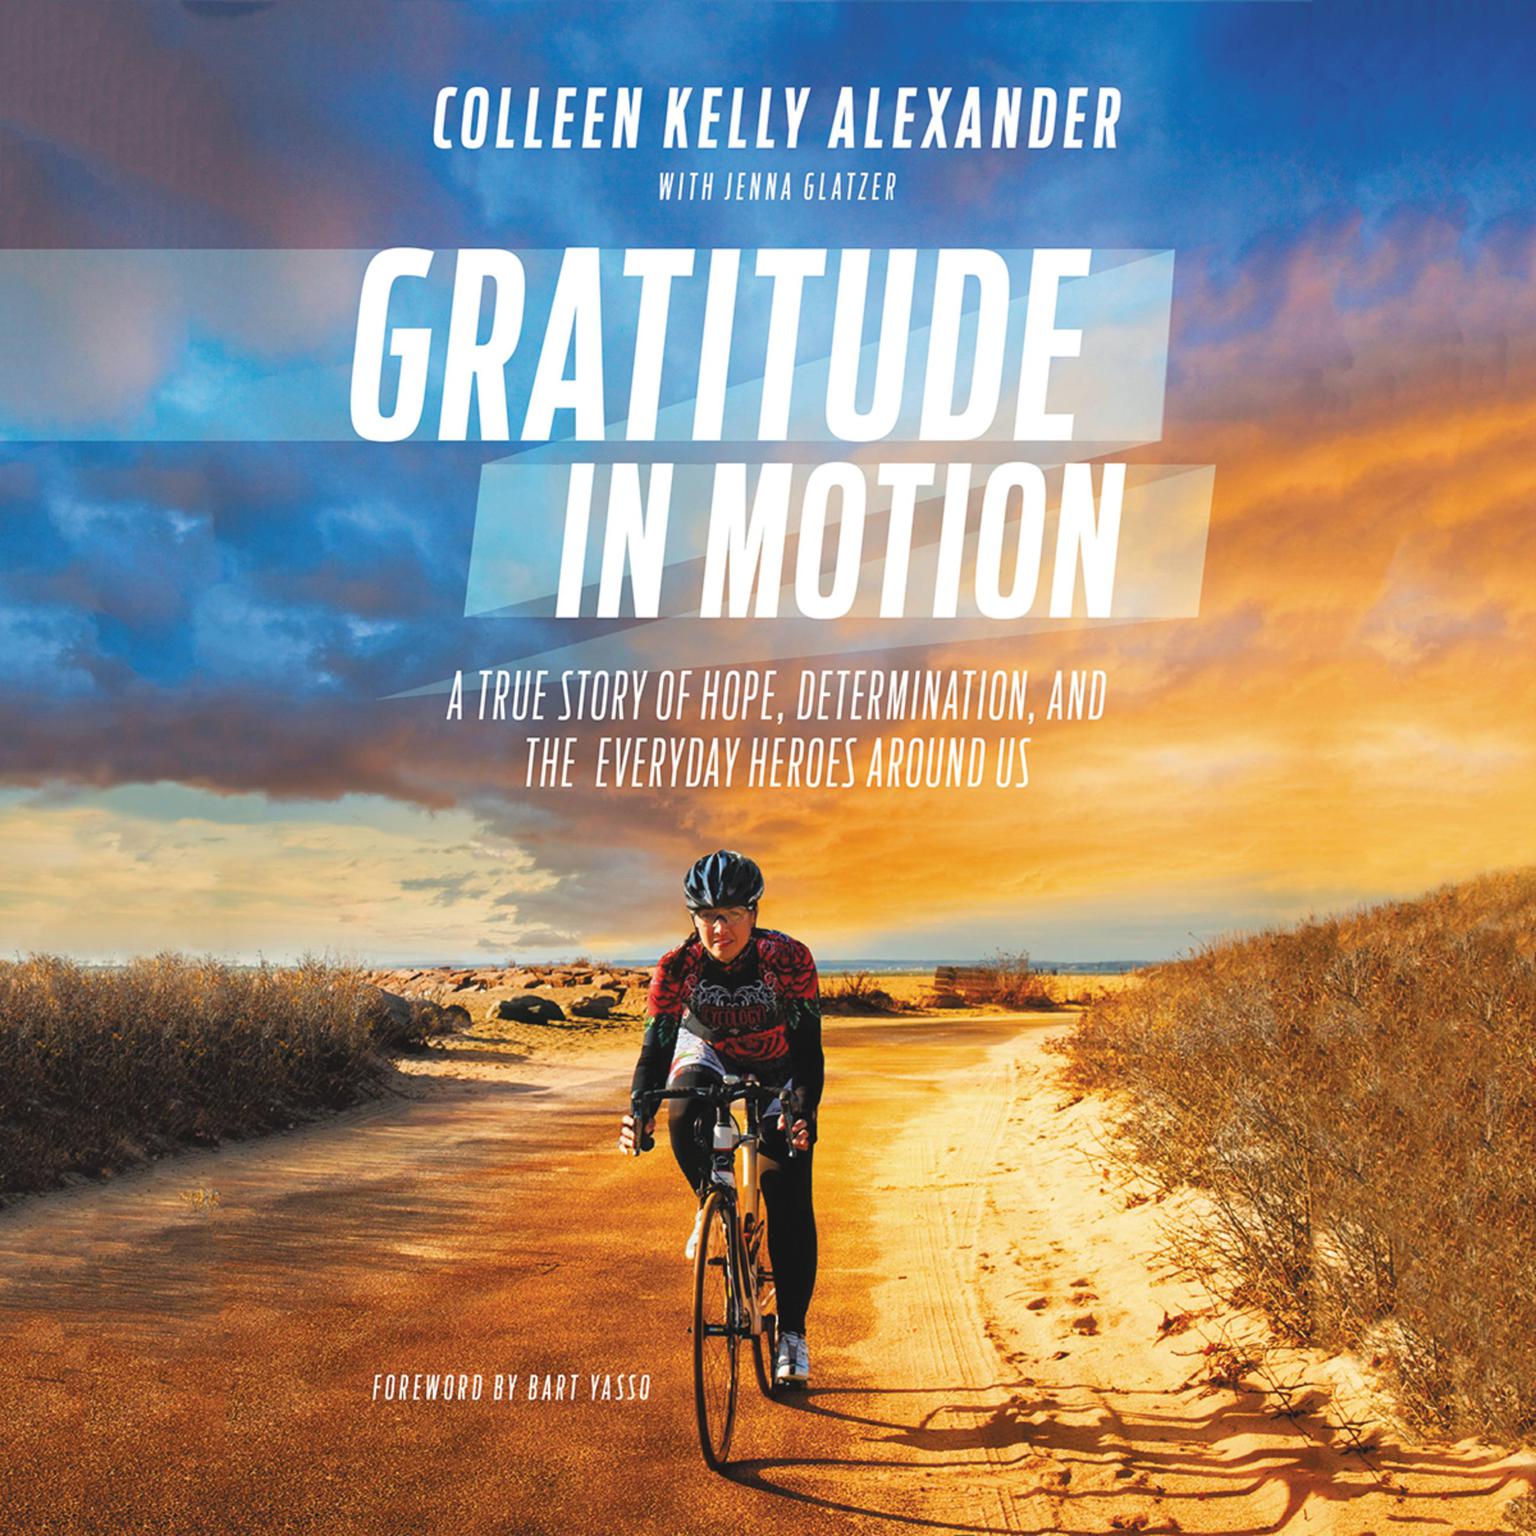 Gratitude in Motion: A True Story of Hope, Determination, and the Everyday Heroes Around Us Audiobook, by Colleen Kelly Alexander